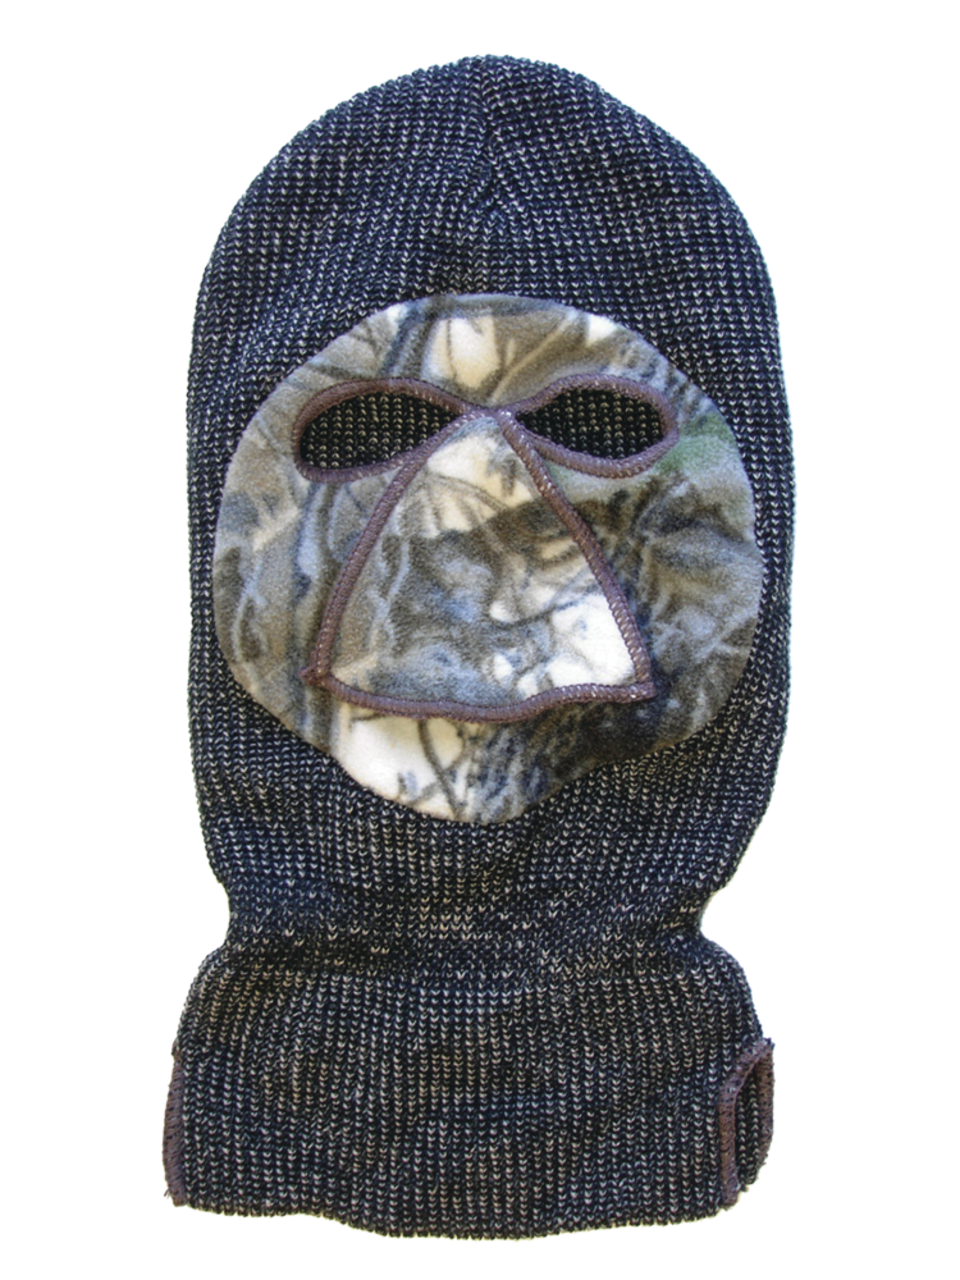 https://media-www.canadiantire.ca/product/playing/hunting/hunting-apparel-footwear/0753542/hunting-face-mask-camouflage-81f20406-21e4-4f2c-881d-d37c6ad120eb.png?imdensity=1&imwidth=640&impolicy=mZoom